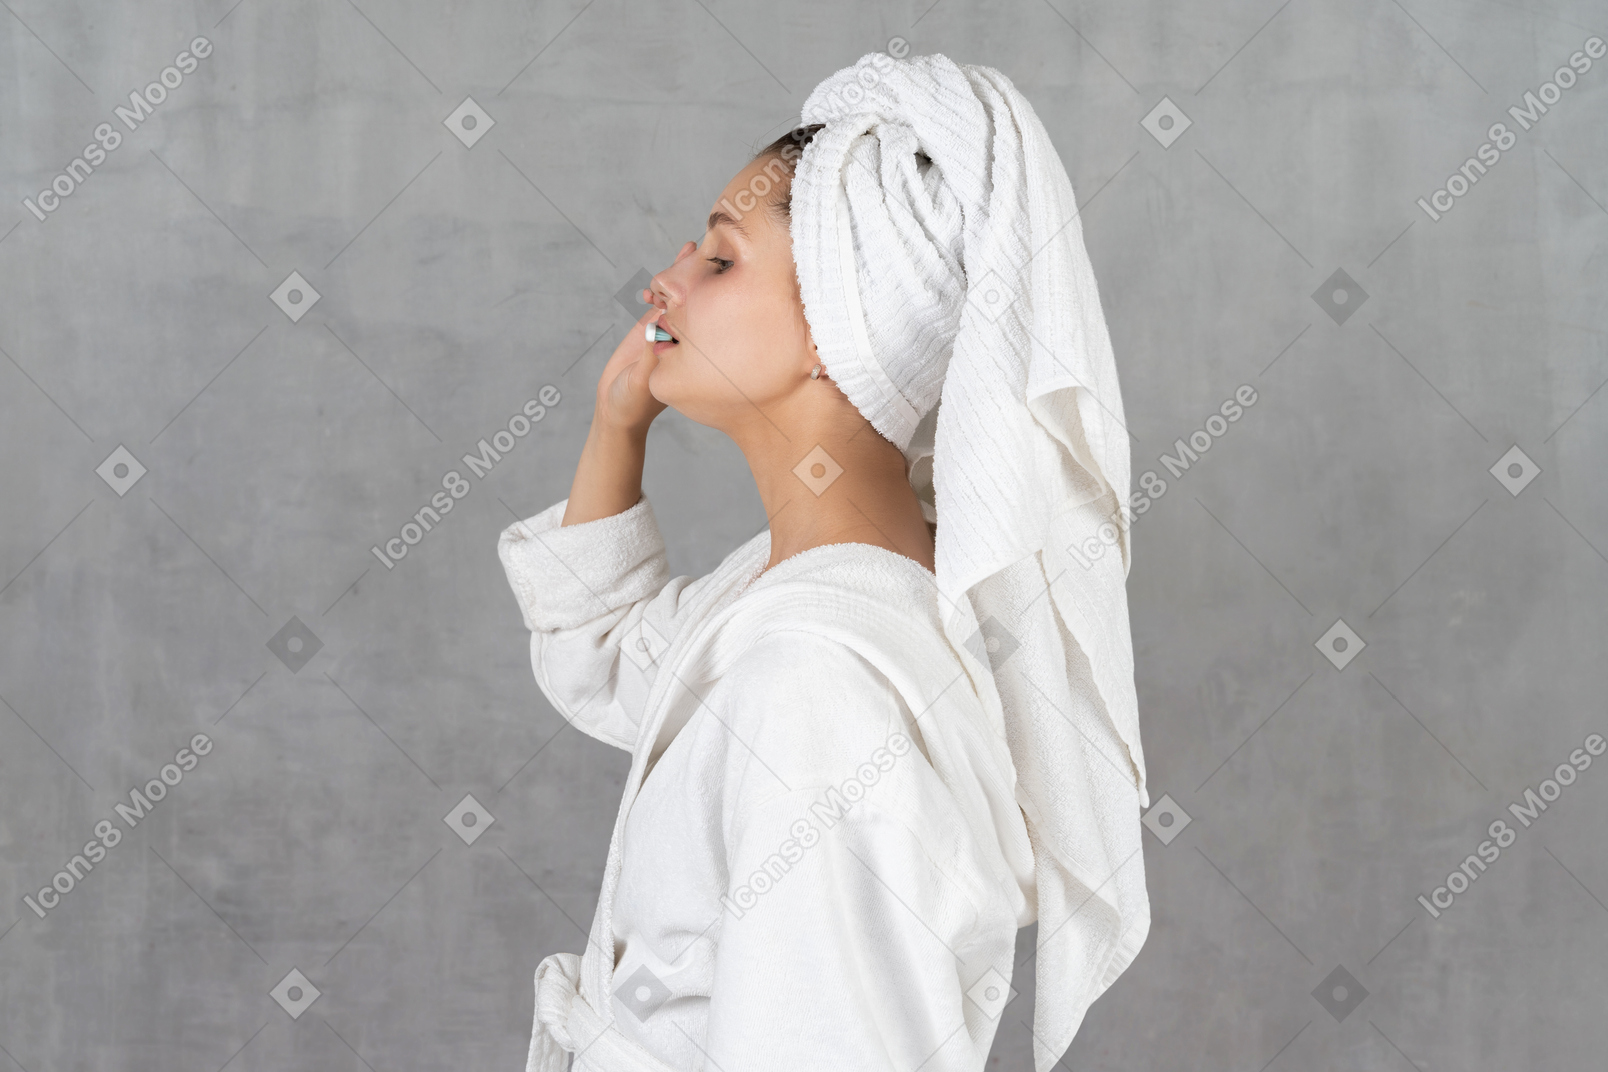 Side view of a woman in bathrobe brushing her teeth